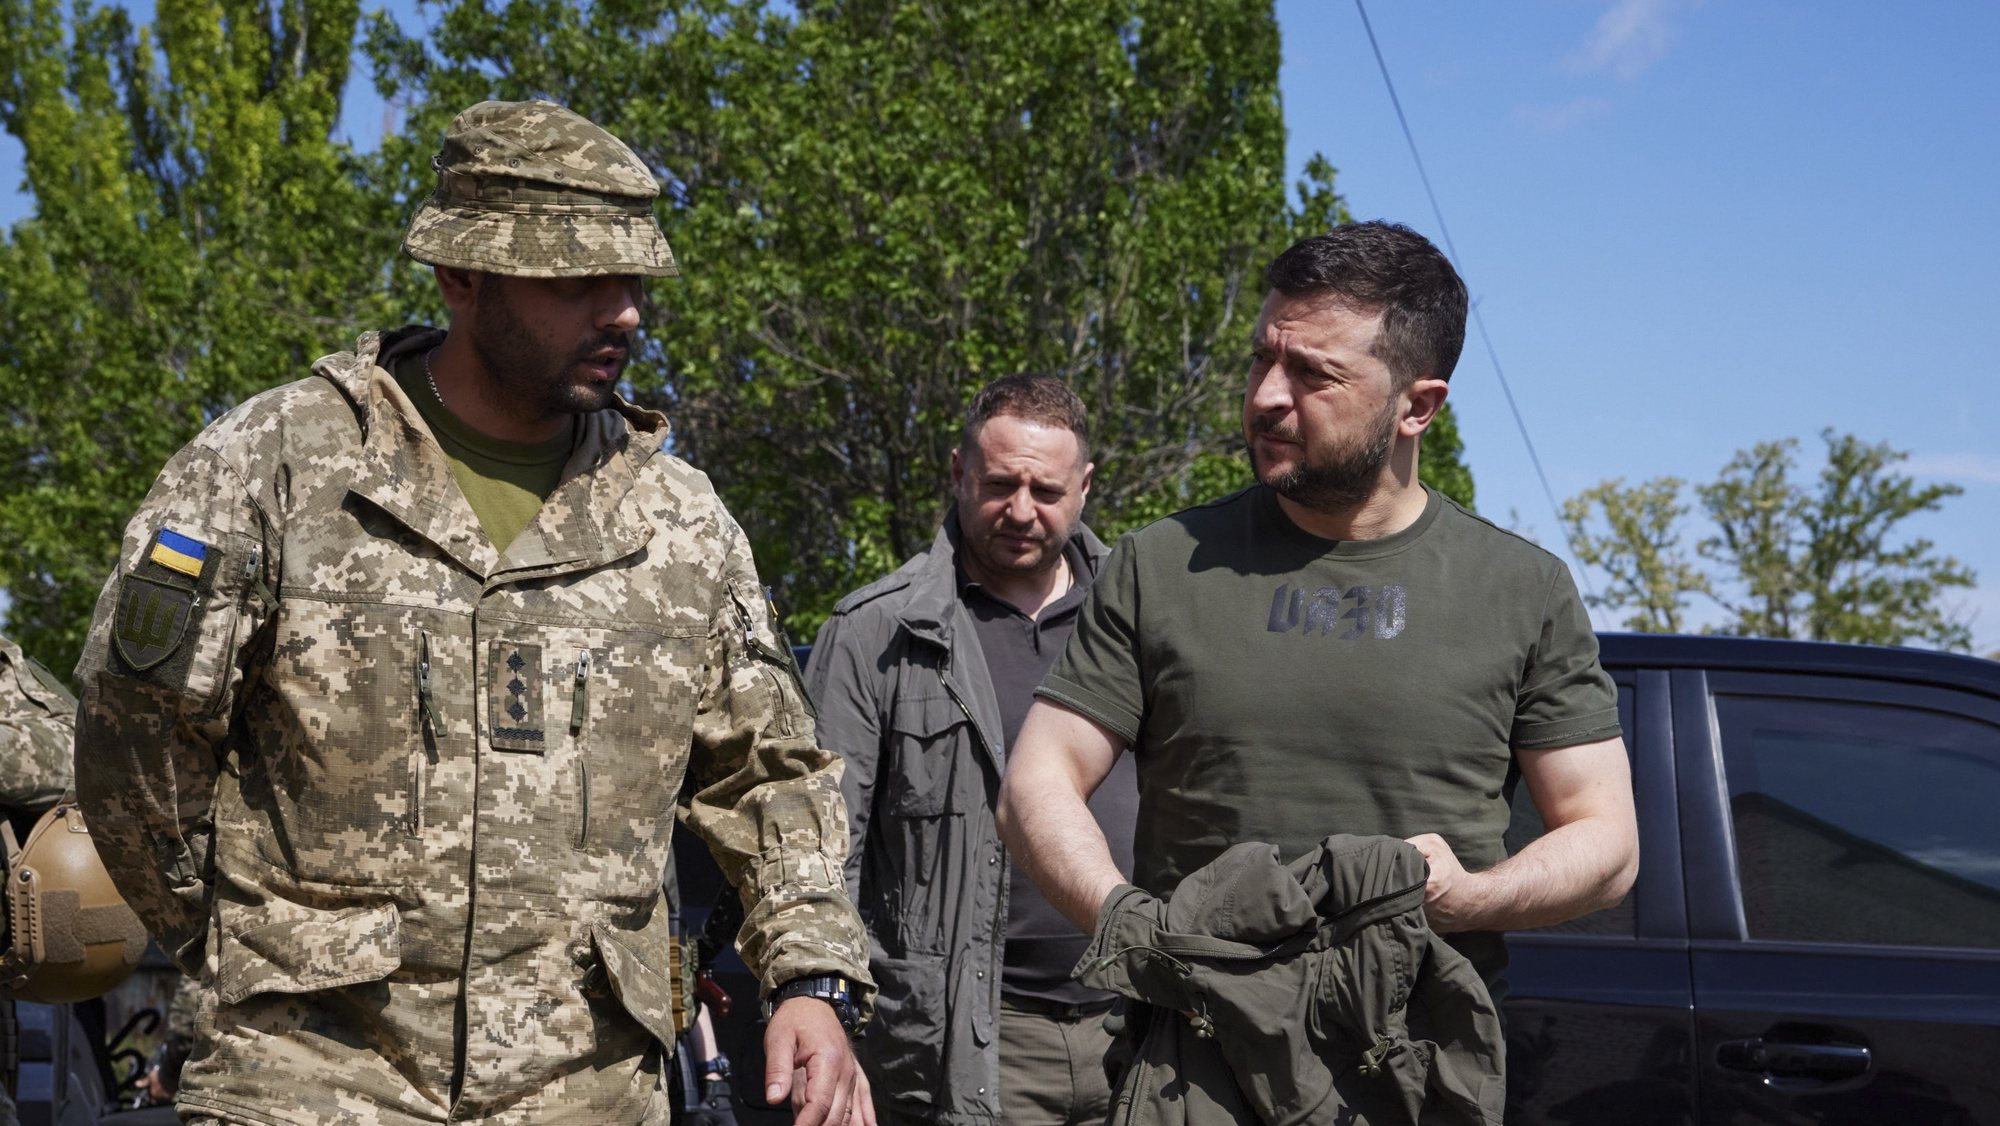 epa09998211 A handout picture made available by the presidential press service shows Ukrainian President Volodymyr Zelensky (R) speaking with servicemen during his visit to a frontline in the Zaporizhia area, Ukraine, 05 June 2022 amid the Russian invasion. Zelensky got himself updated on the operational situation at the line of defense. Russian troops had invaded Ukraine on 24 February, starting a conflict that provoked fighting, destruction and a humanitarian crisis since.  EPA/PRESIDENTIAL PRESS SERVICE HANDOUT HANDOUT  HANDOUT EDITORIAL USE ONLY/NO SALES